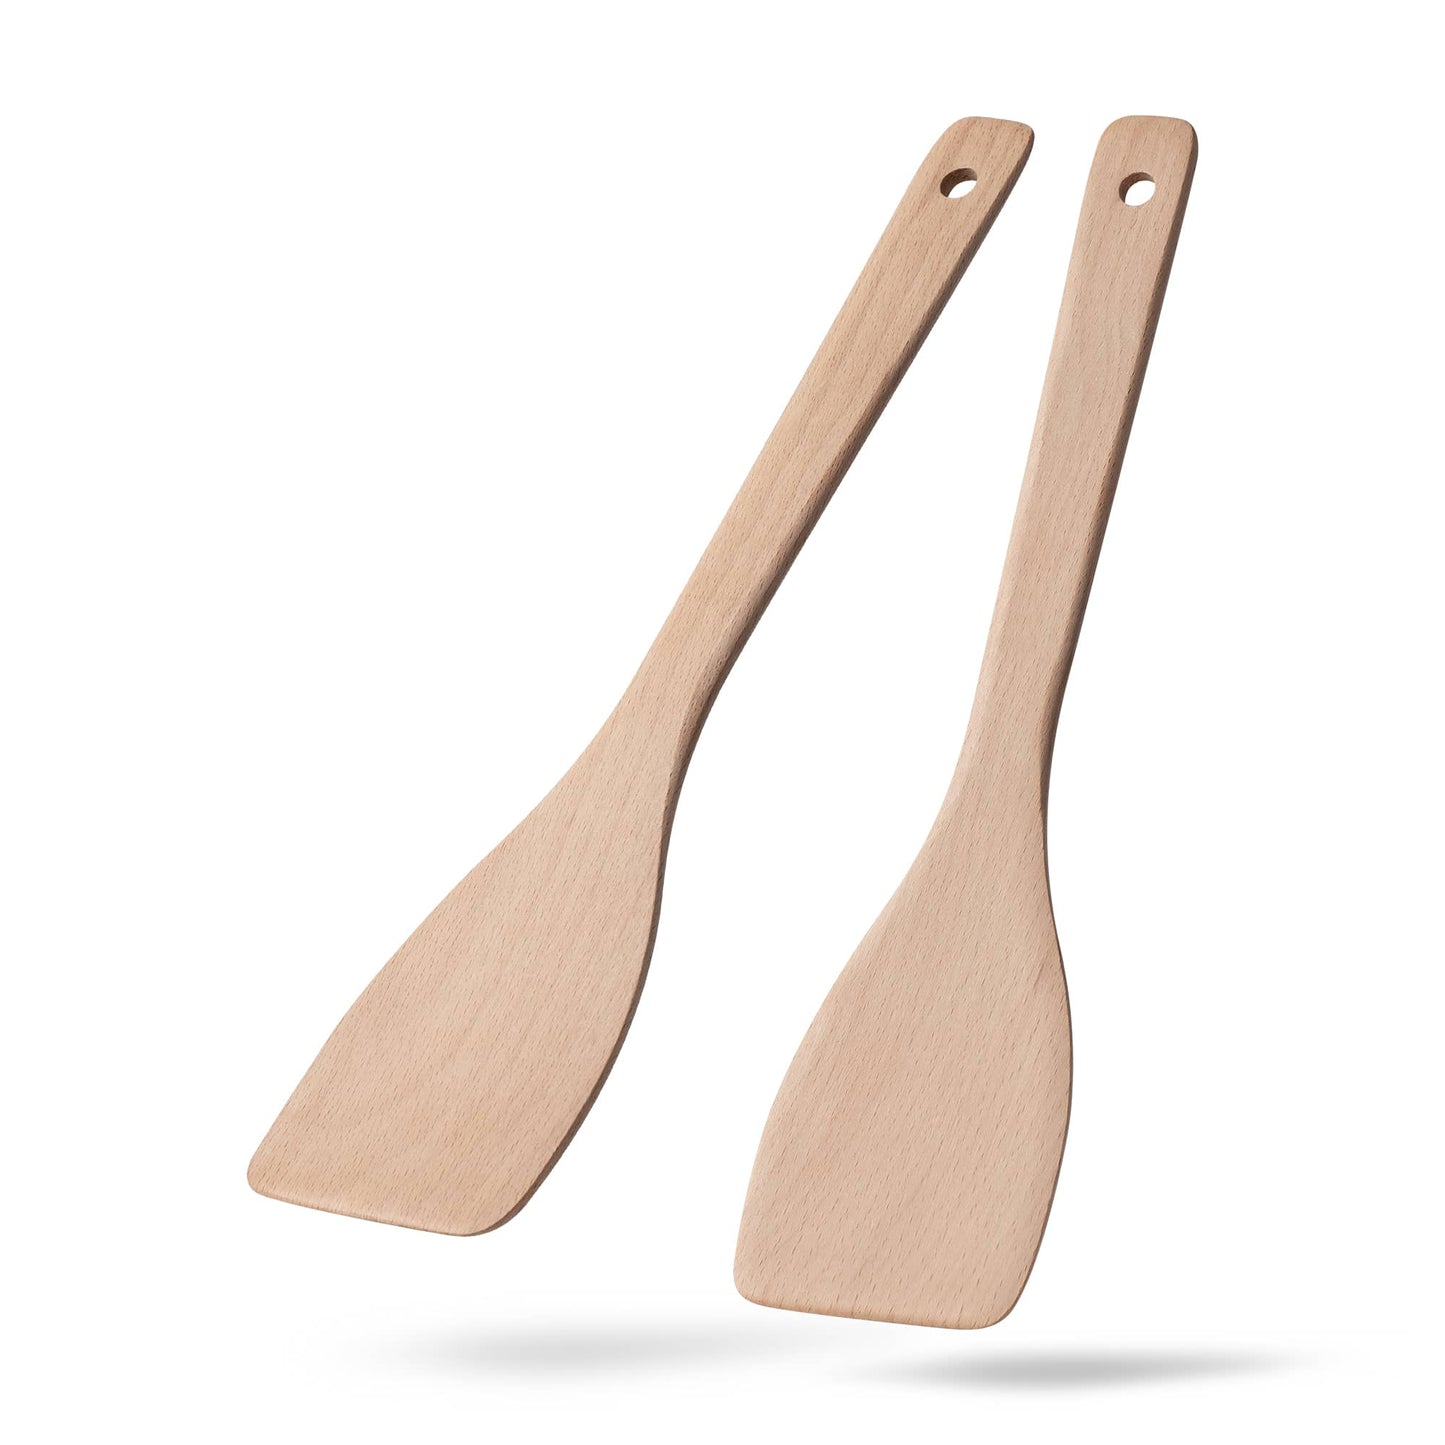 2pcs 13inch Wooden Cooking Spatulas Turners